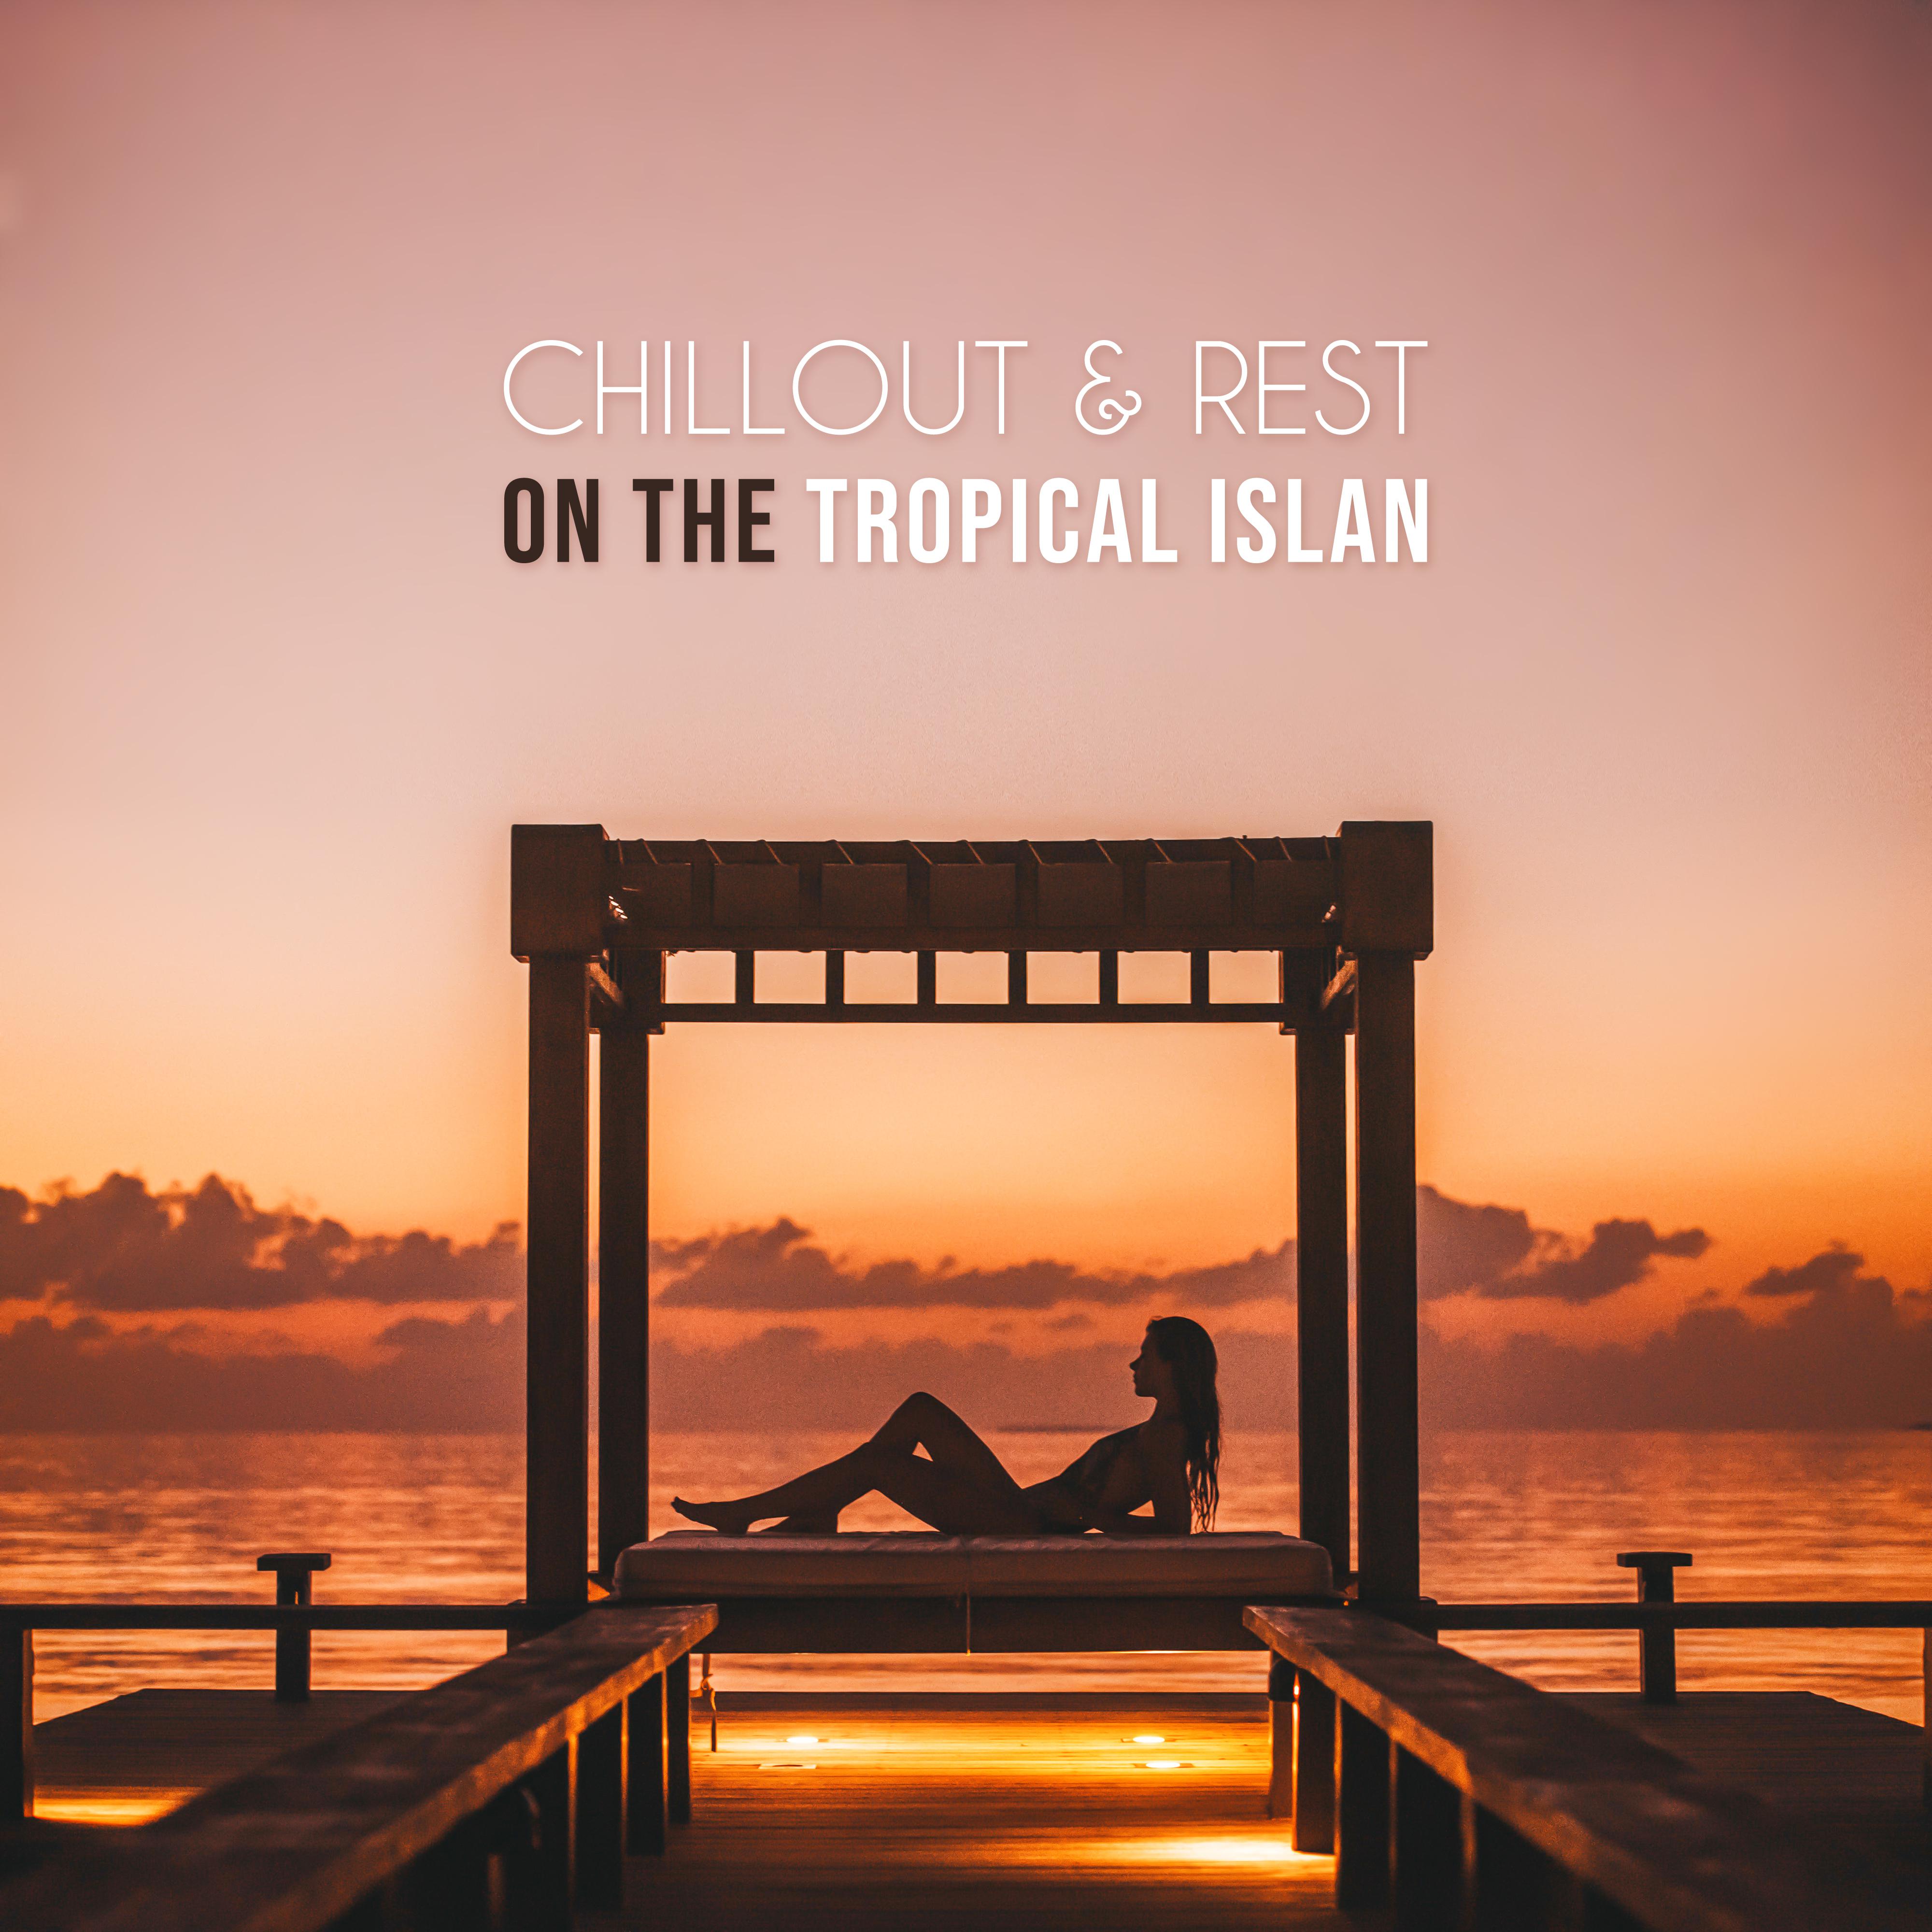 Chillout & Rest on the Tropical Island: 2019 Chill Out Relaxing Ambients & Deep Slow Beats, Sun Salutation, Relaxation on the Beach with Love & Drinks